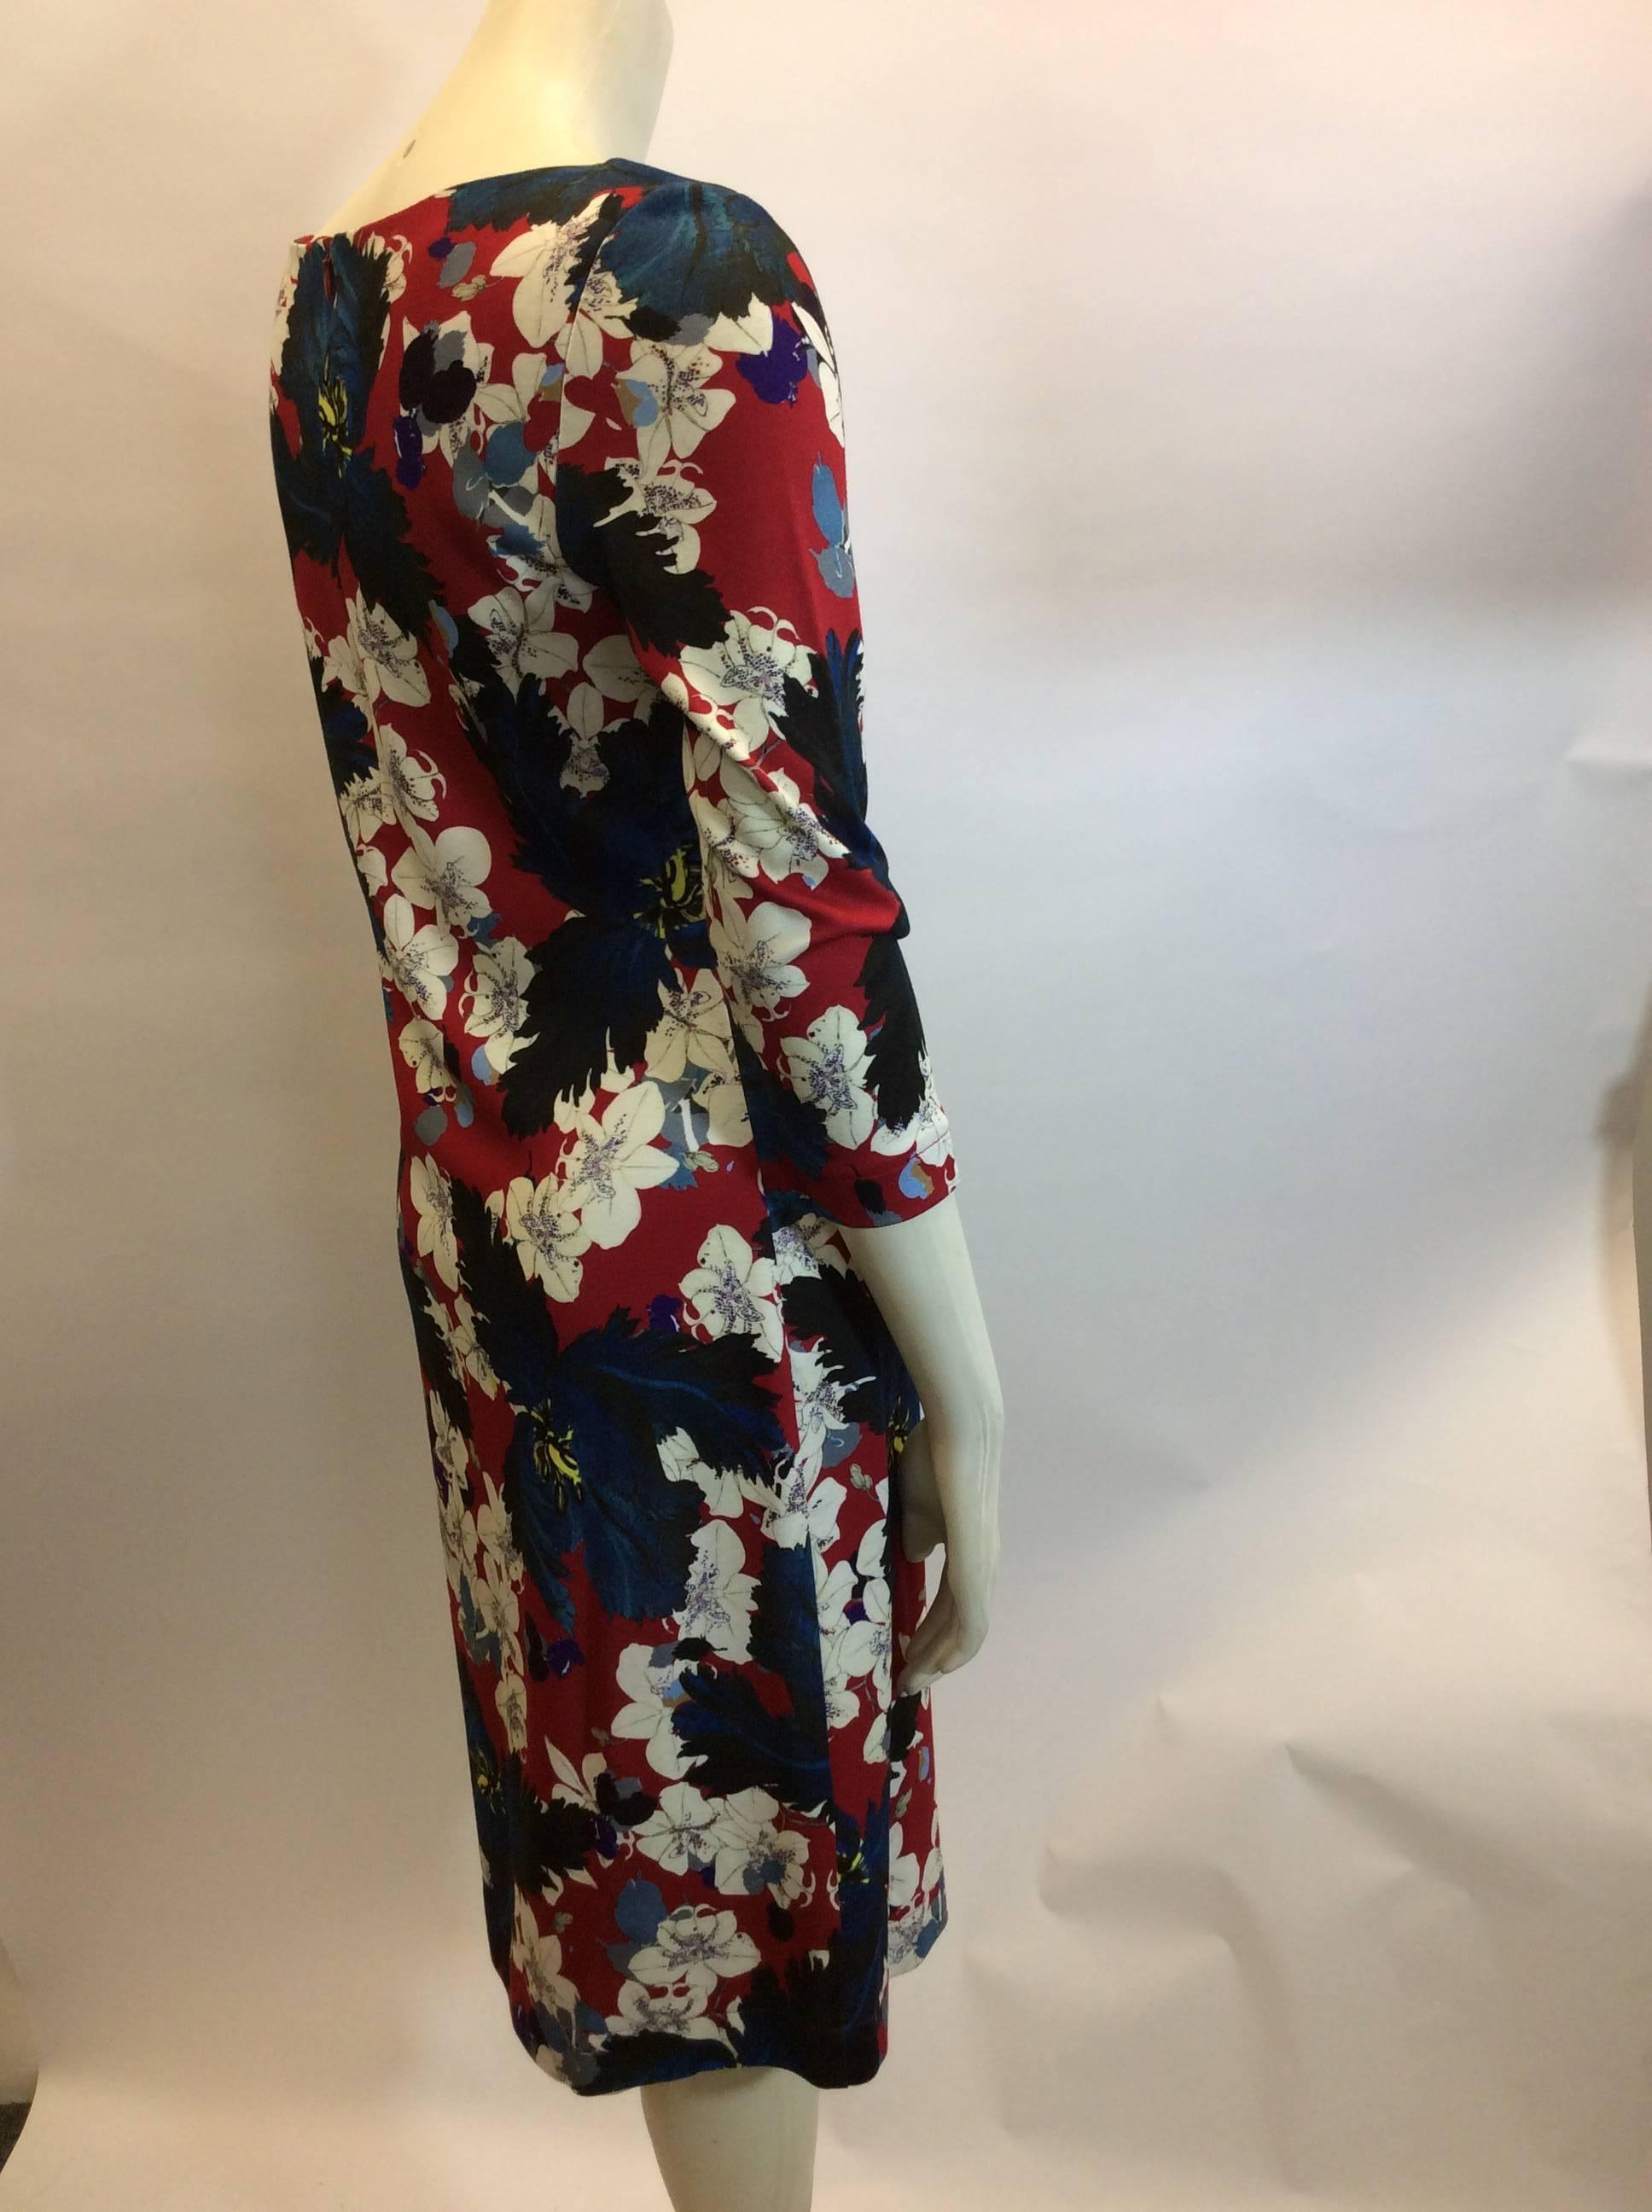 Erdem Floral Jersey Dress In Excellent Condition For Sale In Narberth, PA